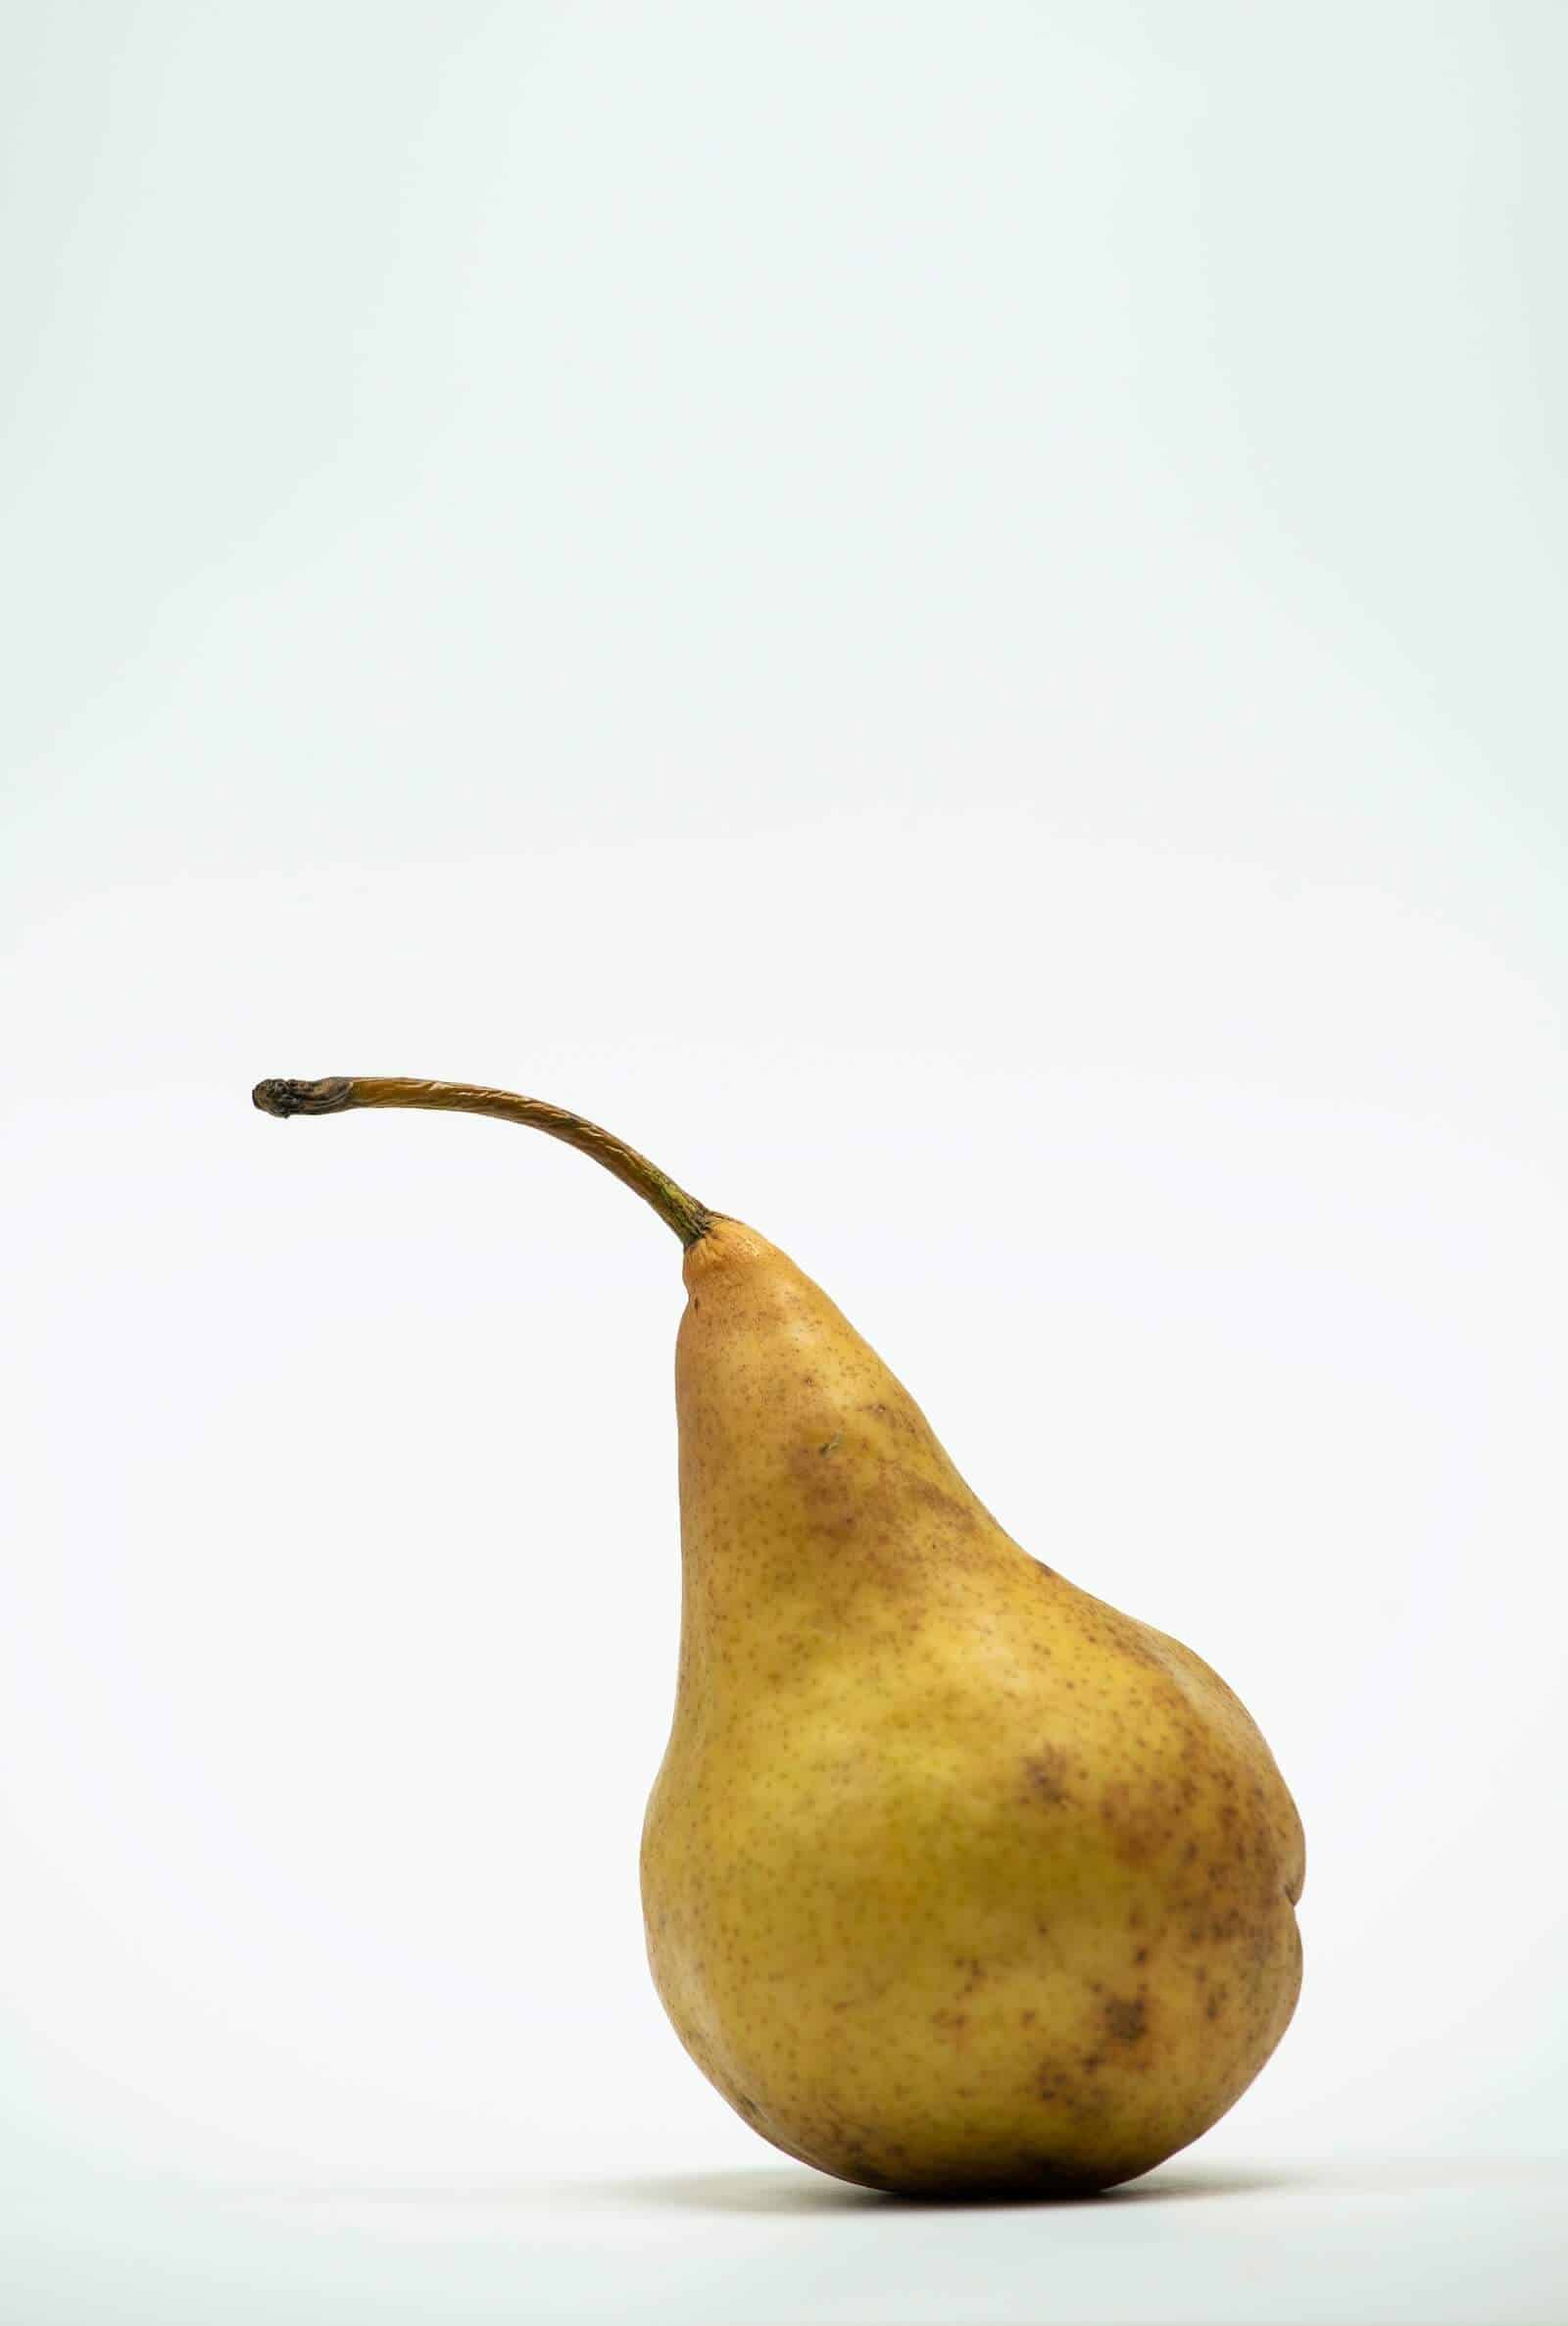 single pear photo for pear baby puree